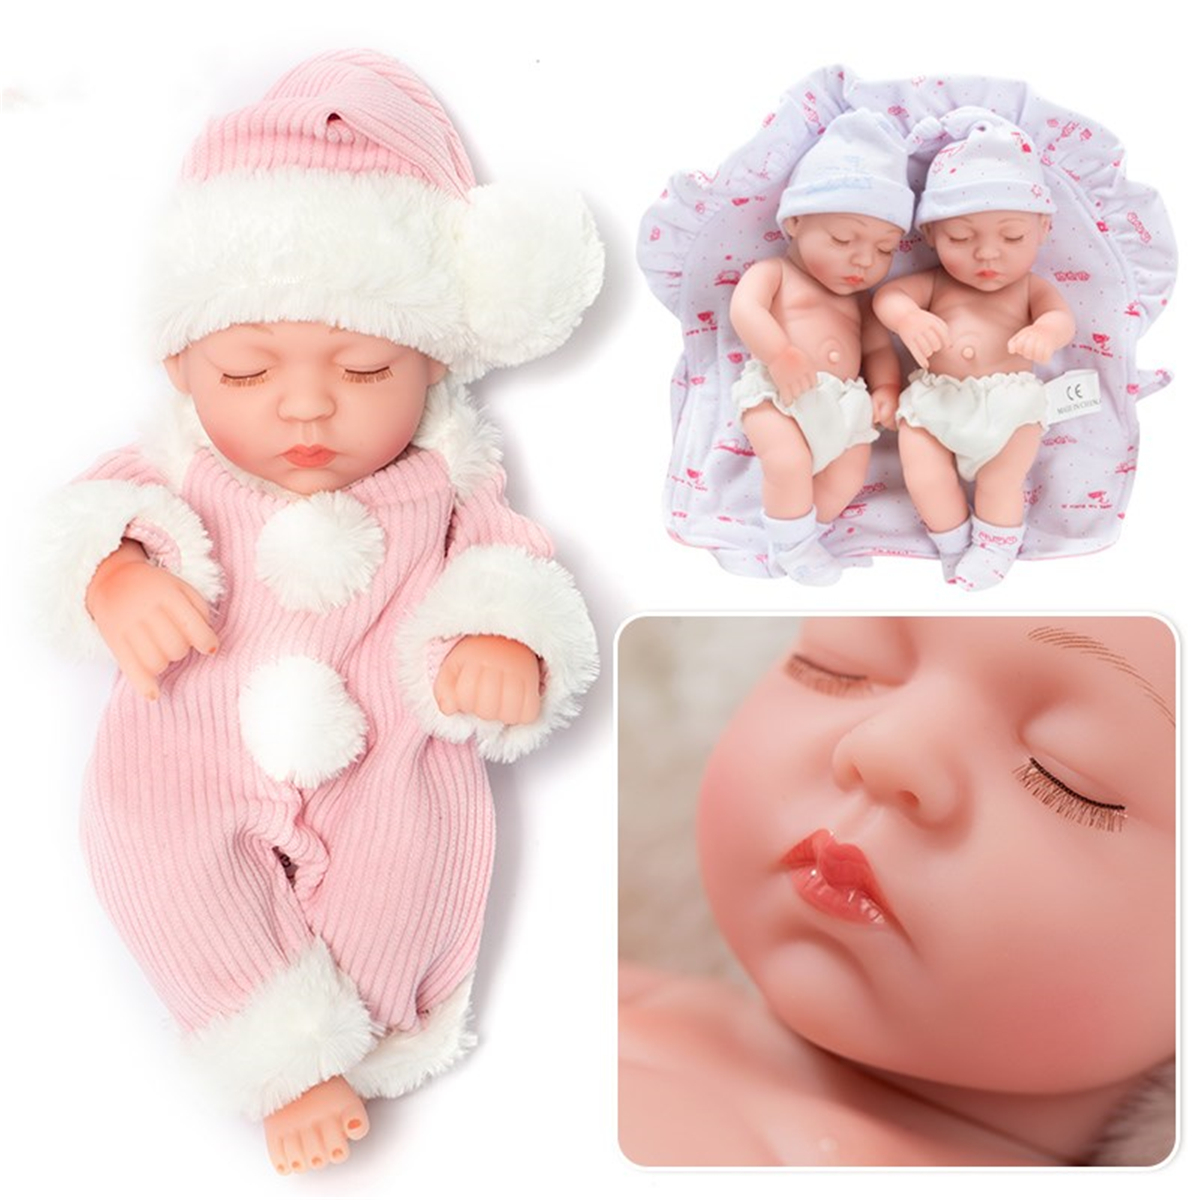 10-Inch-Doll-Reborn-Doll-Reborn-Baby-Soothing-Wet-Water-Toy-1760950-4